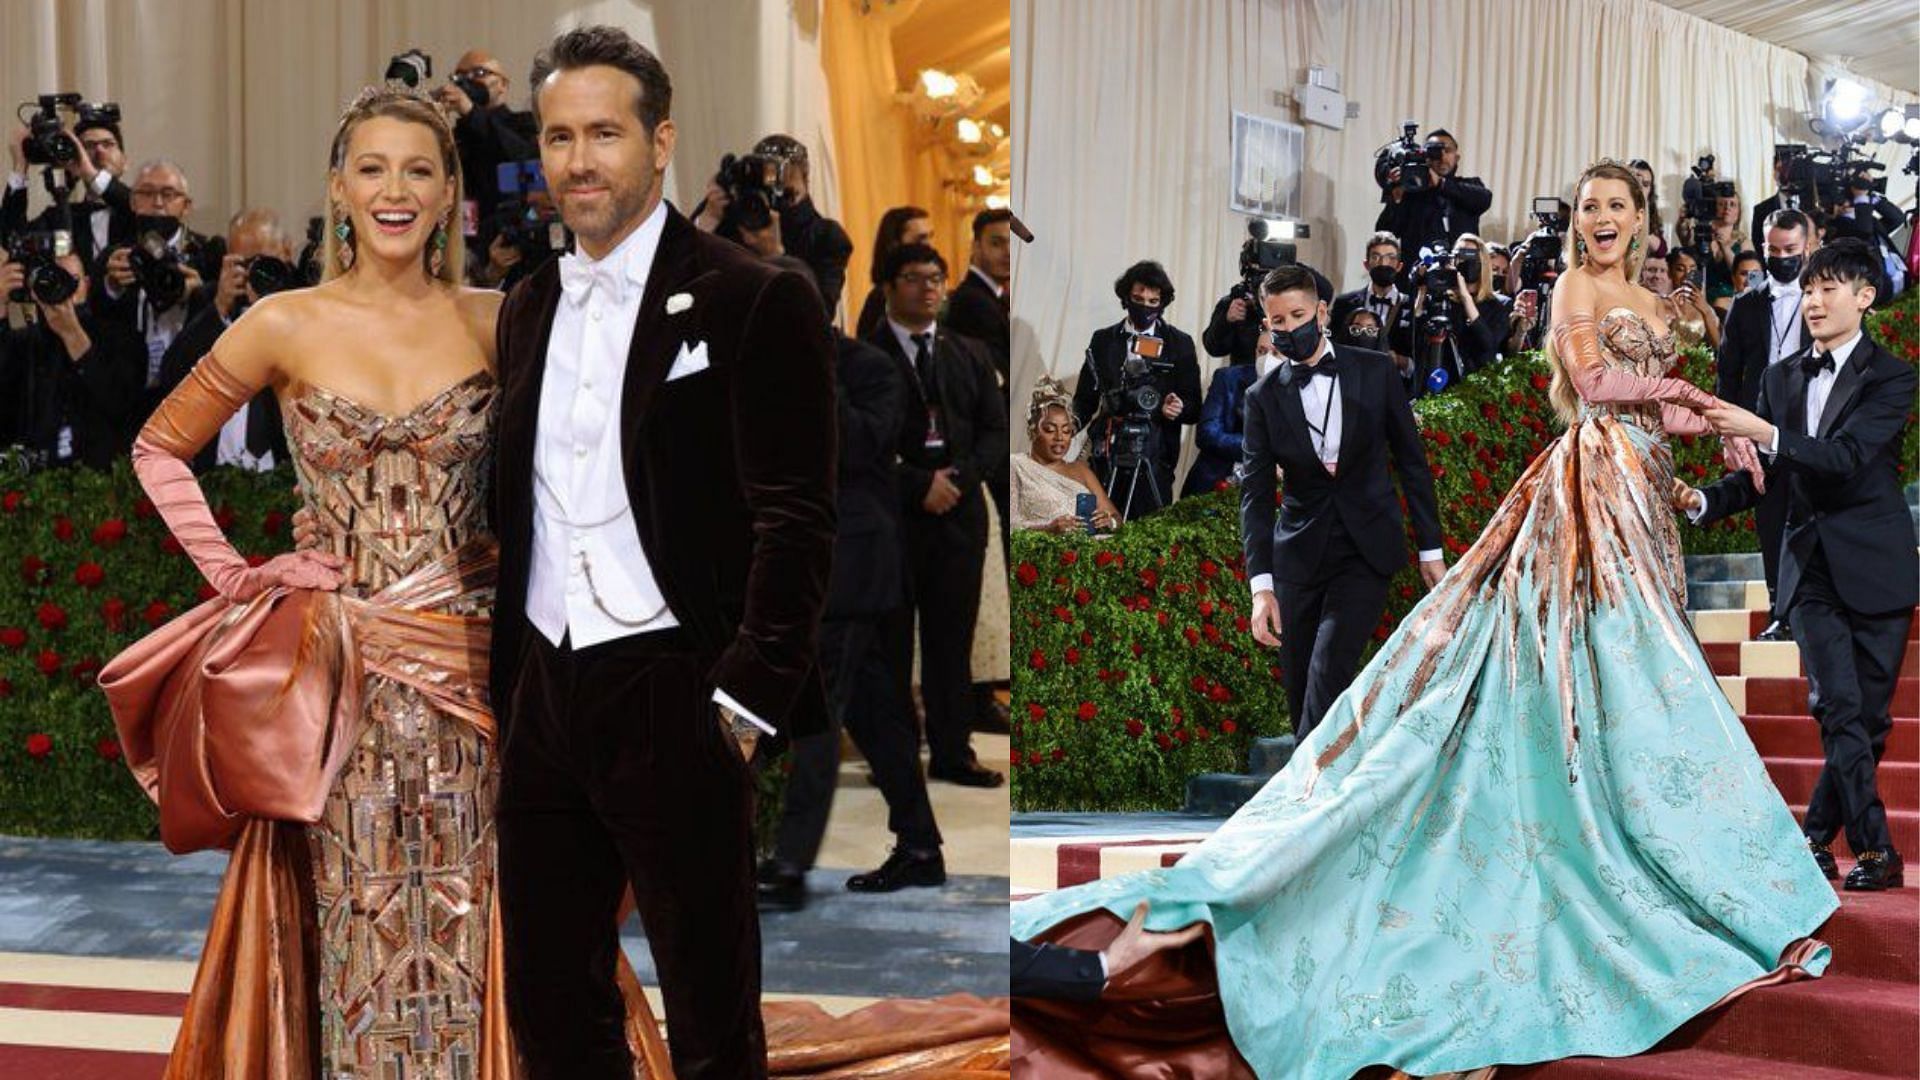 Blake Lively and Ryan Reynolds at the 2022 Met Gala red carpet (Image via rebecamaccise/Twitter)